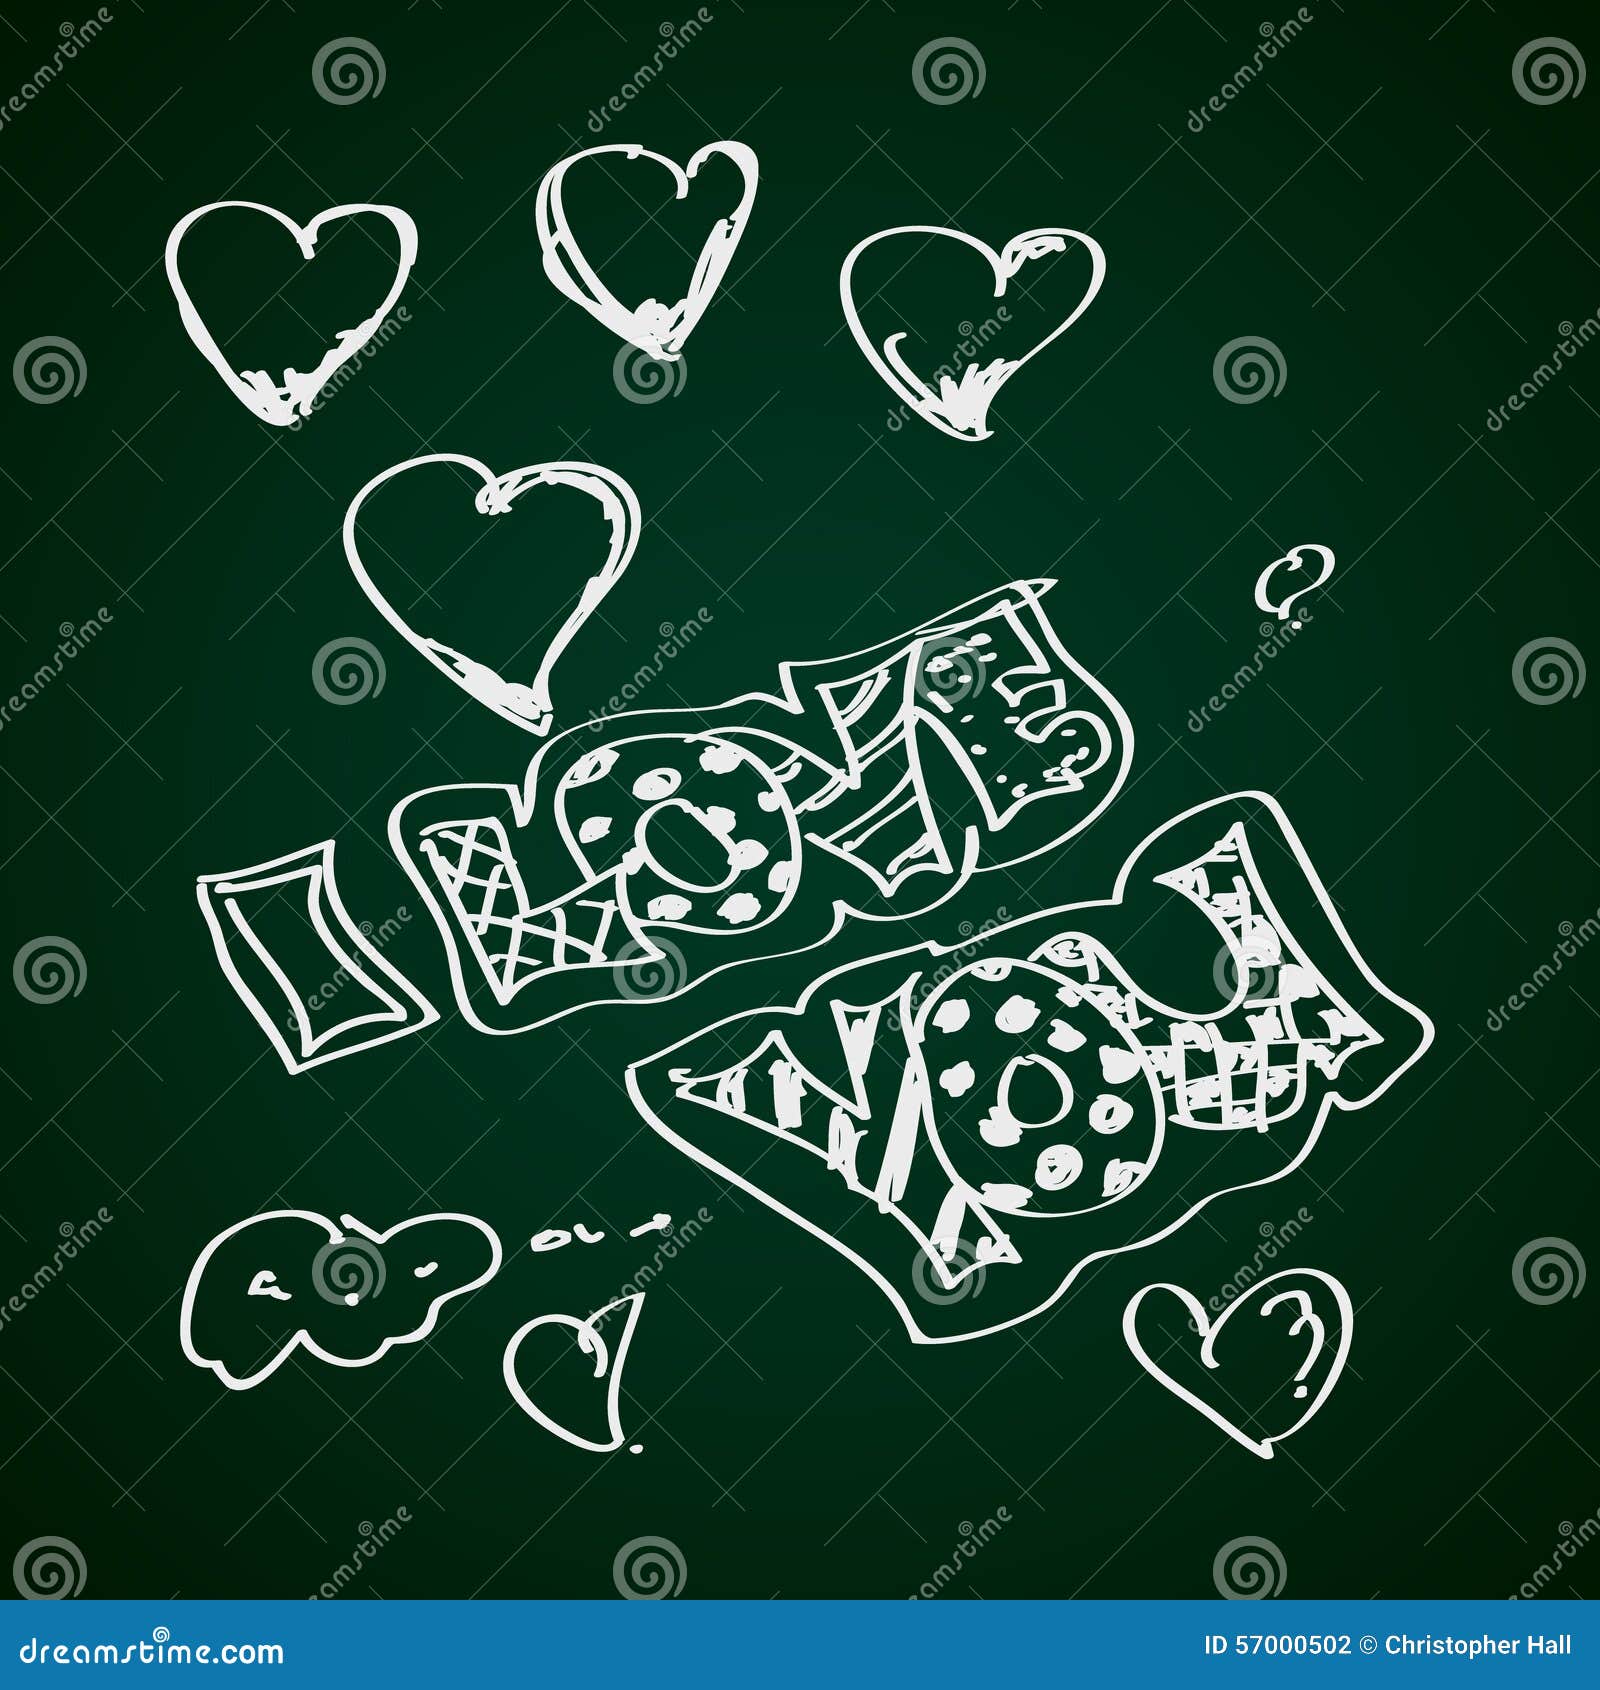 Simple Doodle Of I Love You Stock Vector Image 57000502